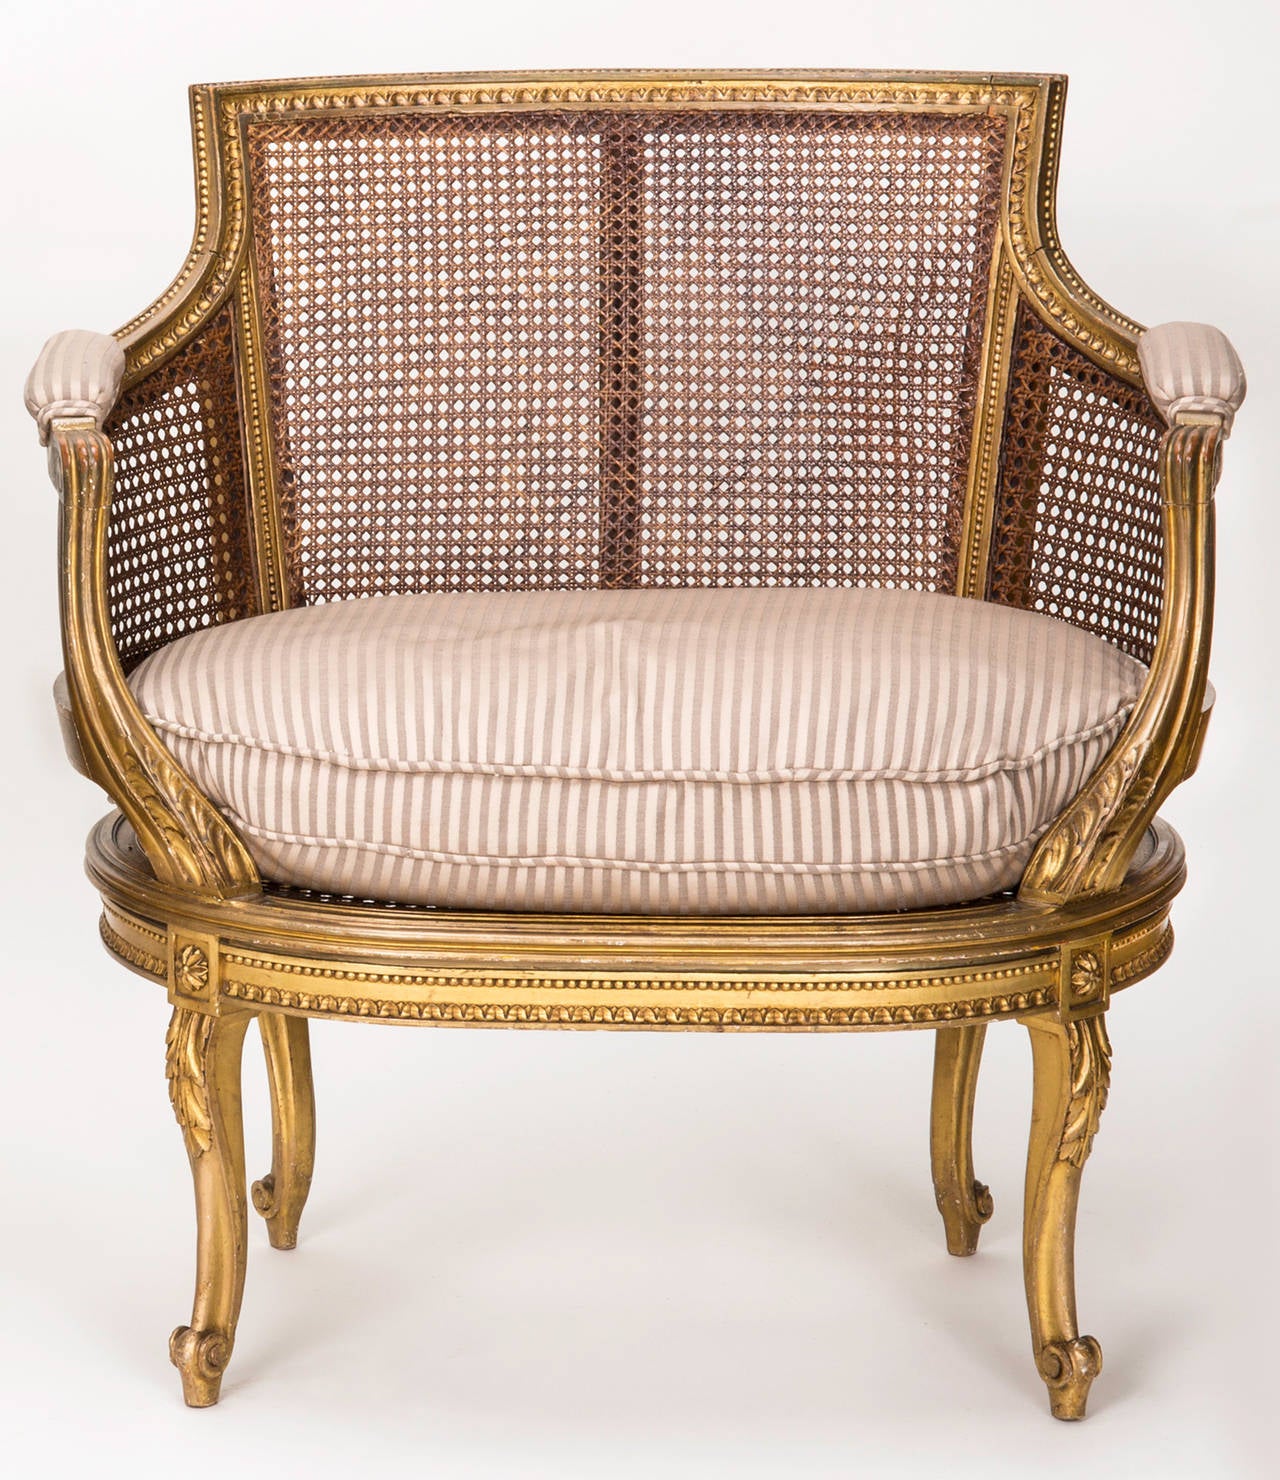 Pair of wonderful French armchairs with cane seat and back, circa 1900s.  Beautifully carved giltwood frame with graceful cabriole legs. Amply sized comfortable seating. Loose down seat cushions in stripe linen. The caning and chair frames are in